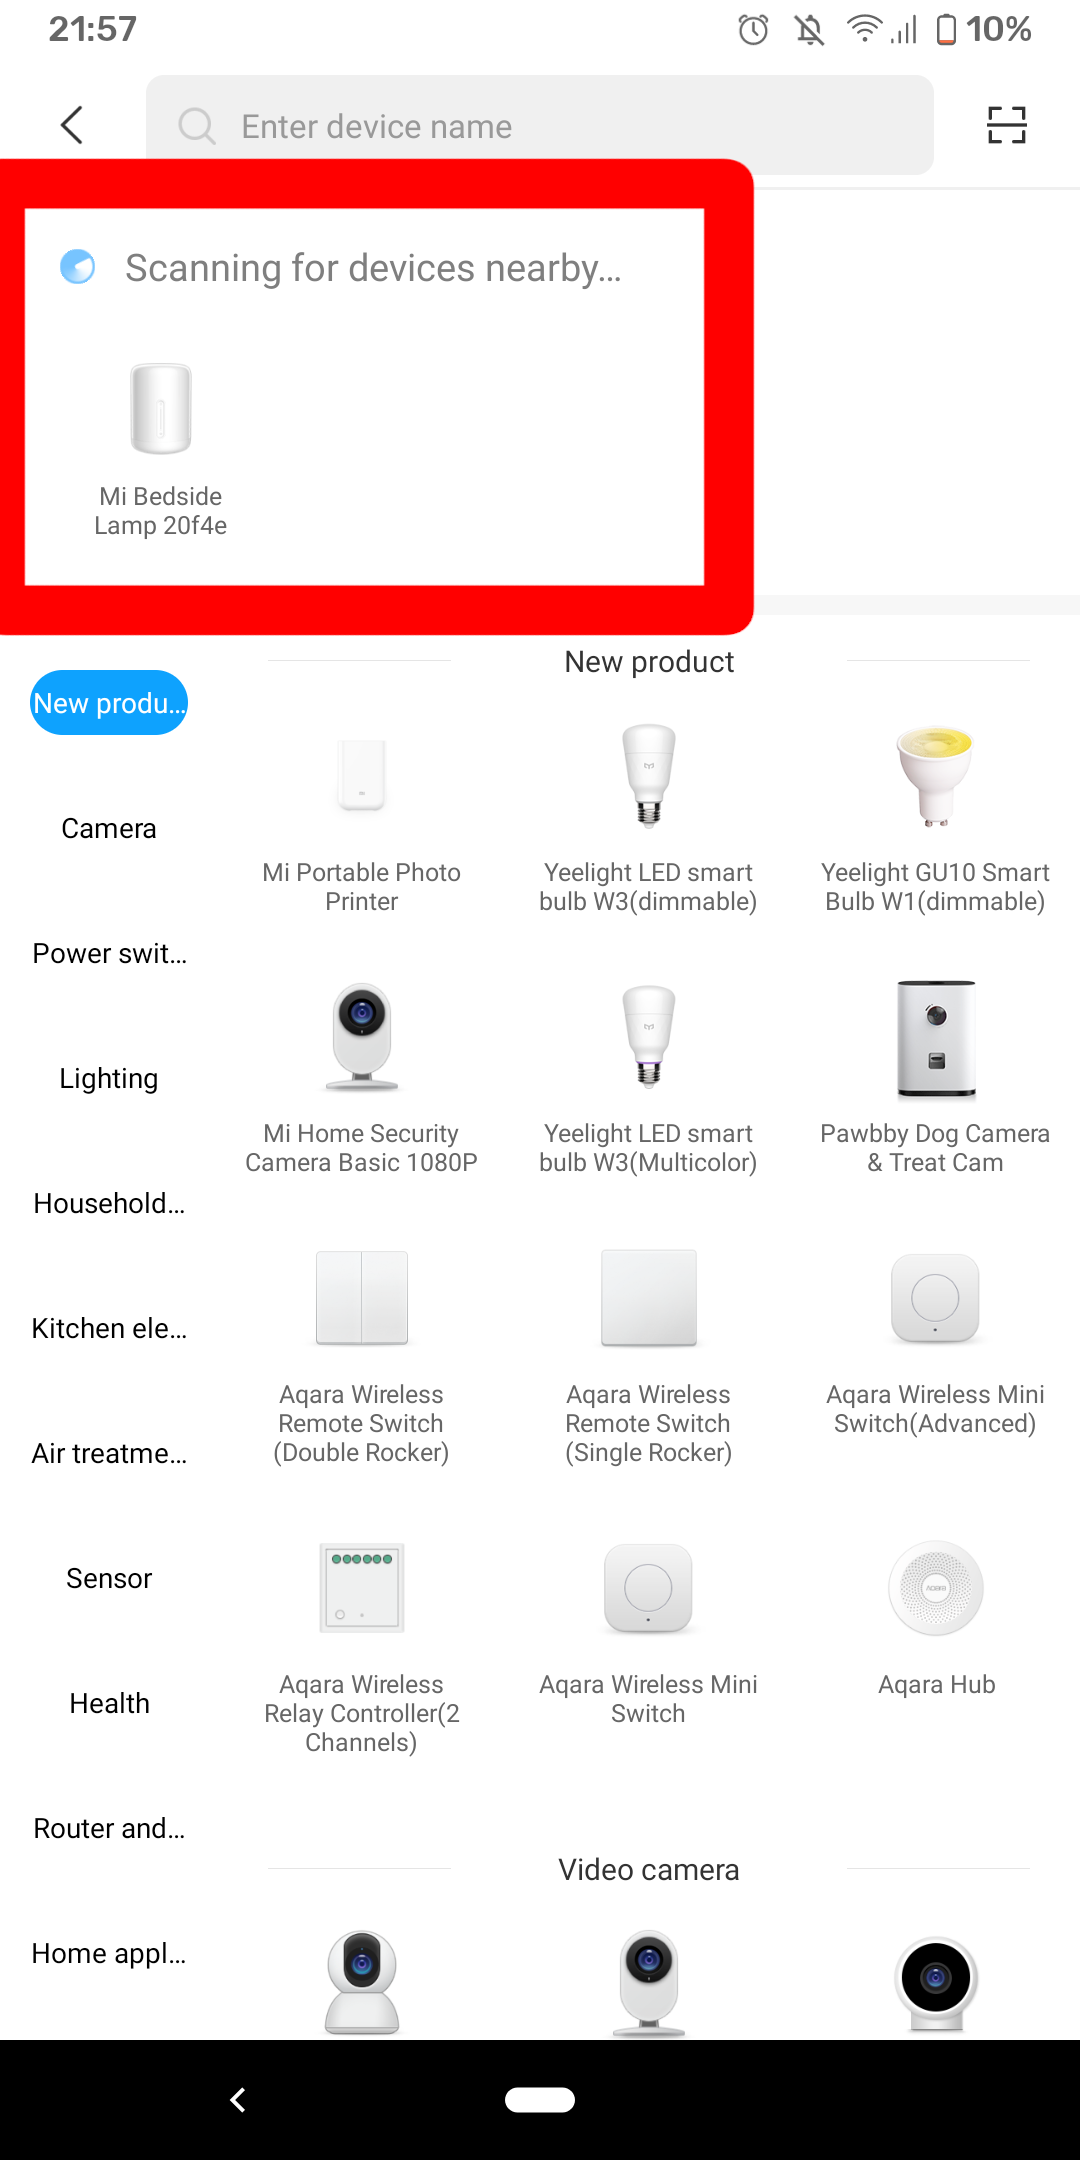 Adding a new device to Xiaomi Home, step 2